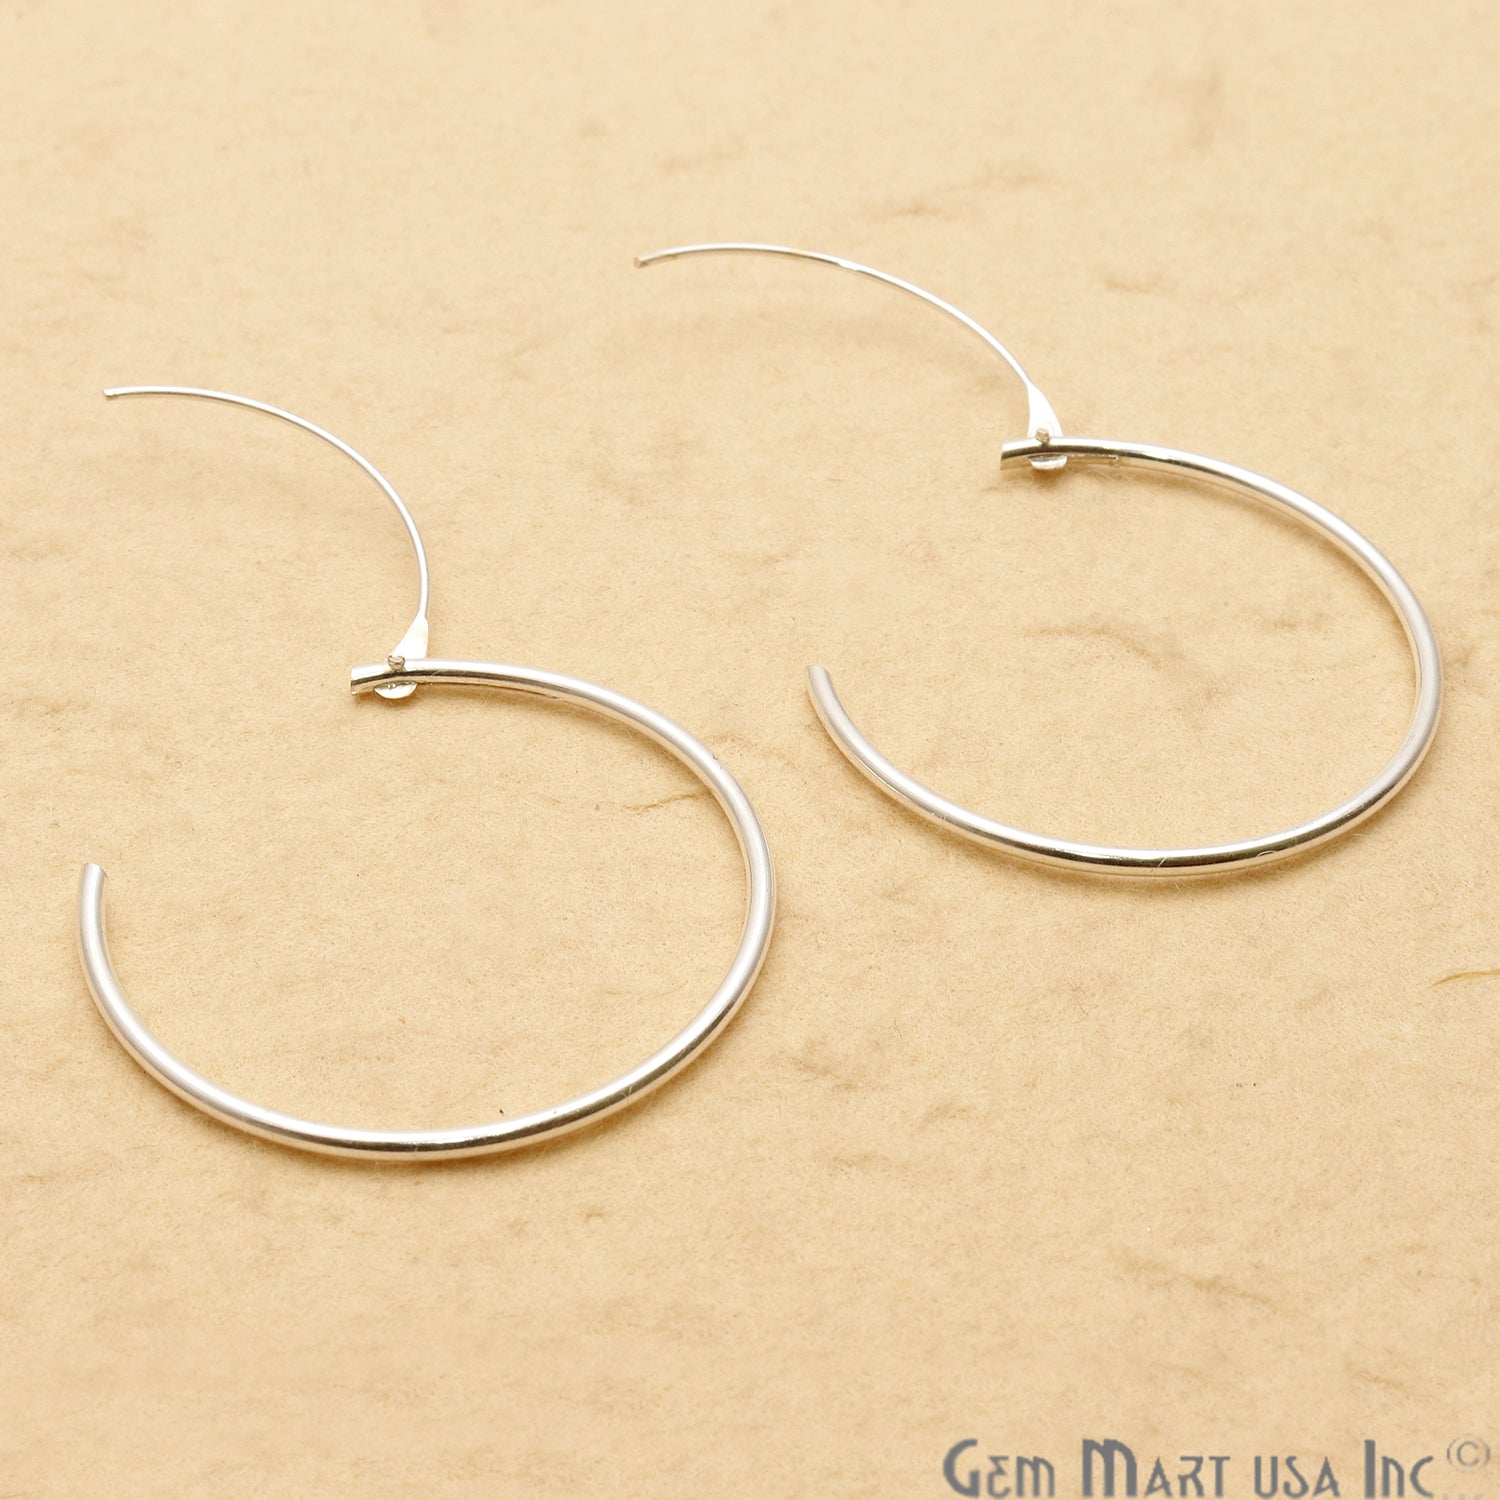 DIY Silver Plated Wire 32mm Finding Hoop Earring - GemMartUSA